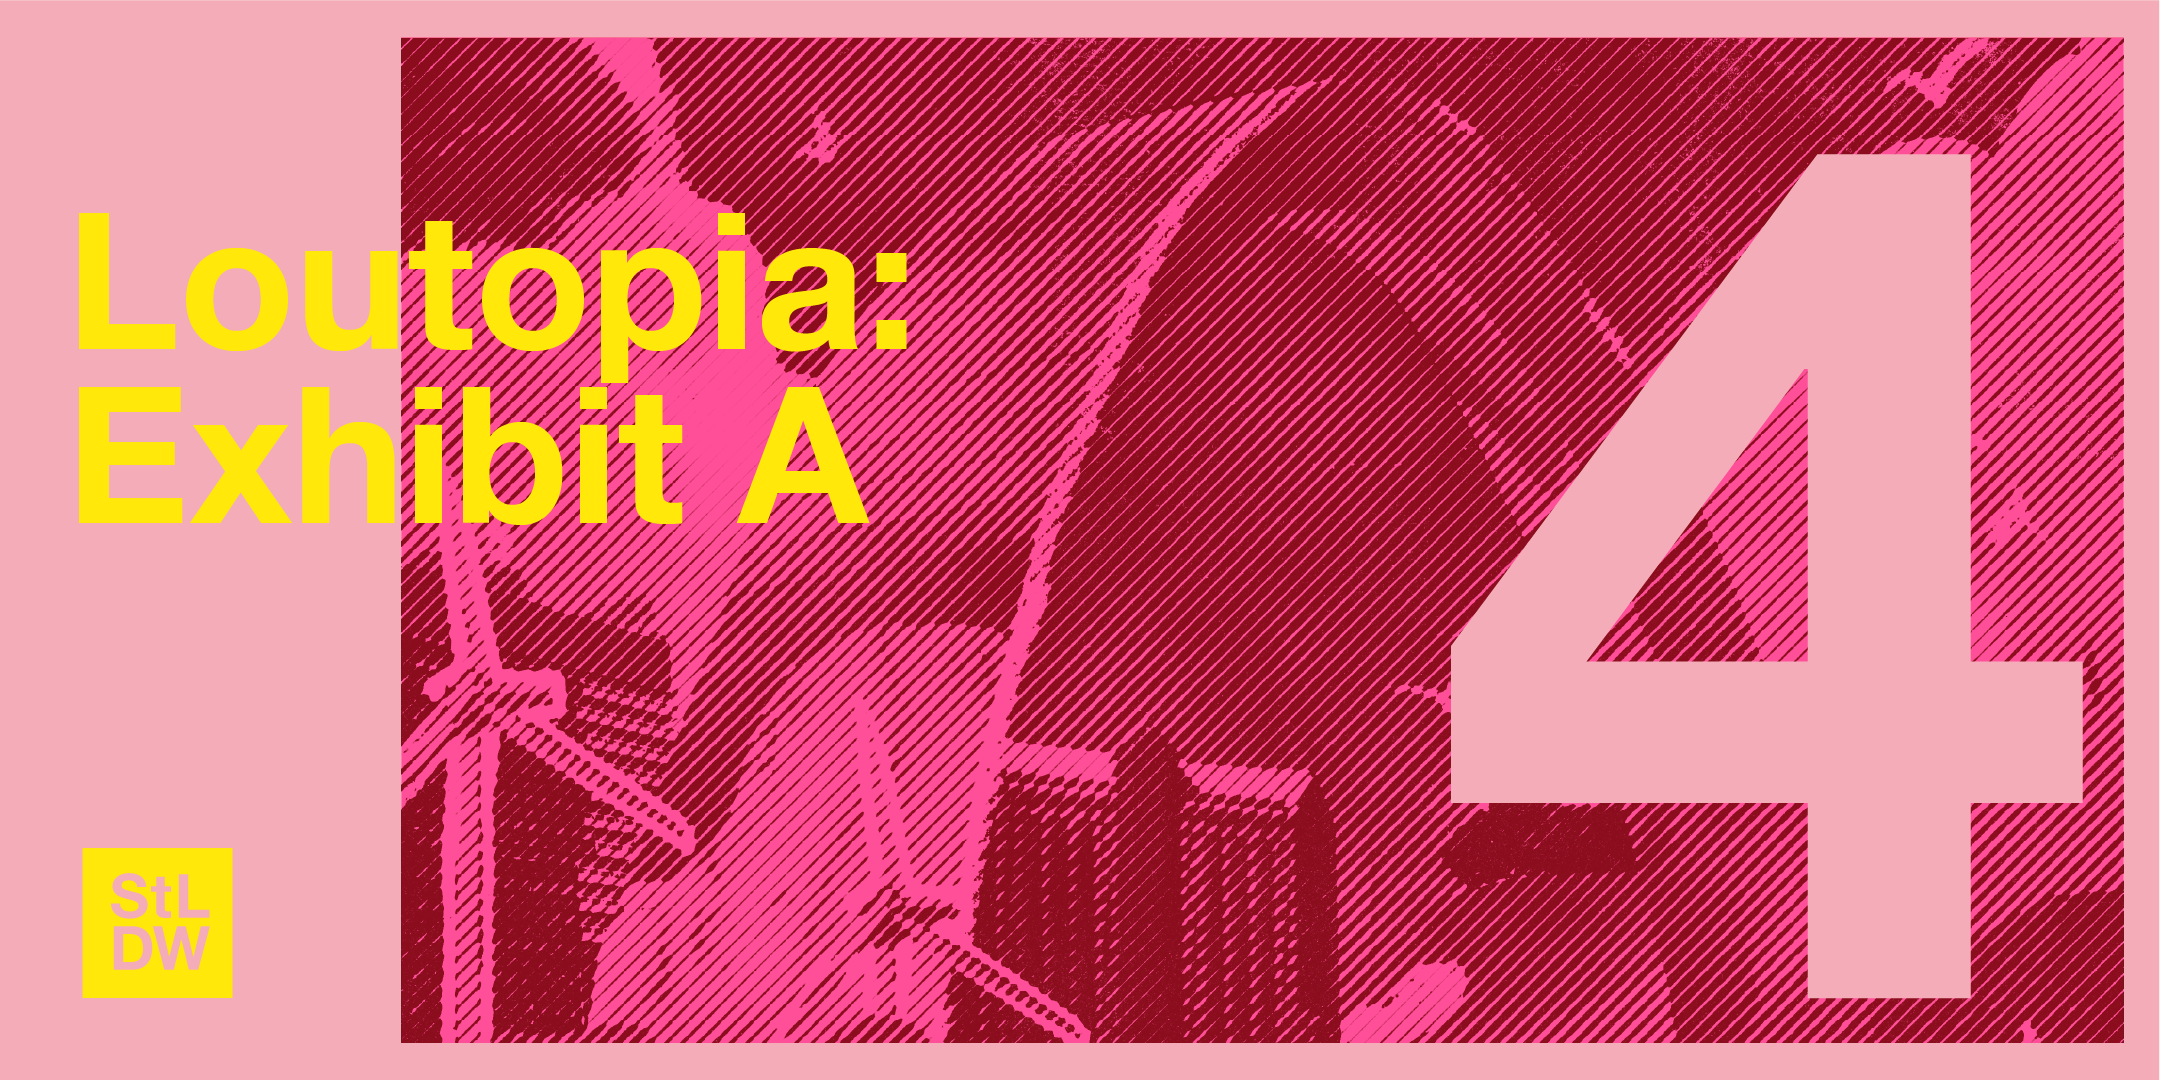 Loutopia : Exhibit A A Pop-Up Experience that Blends Creativity, Nature, and Local Sustainable Impact.